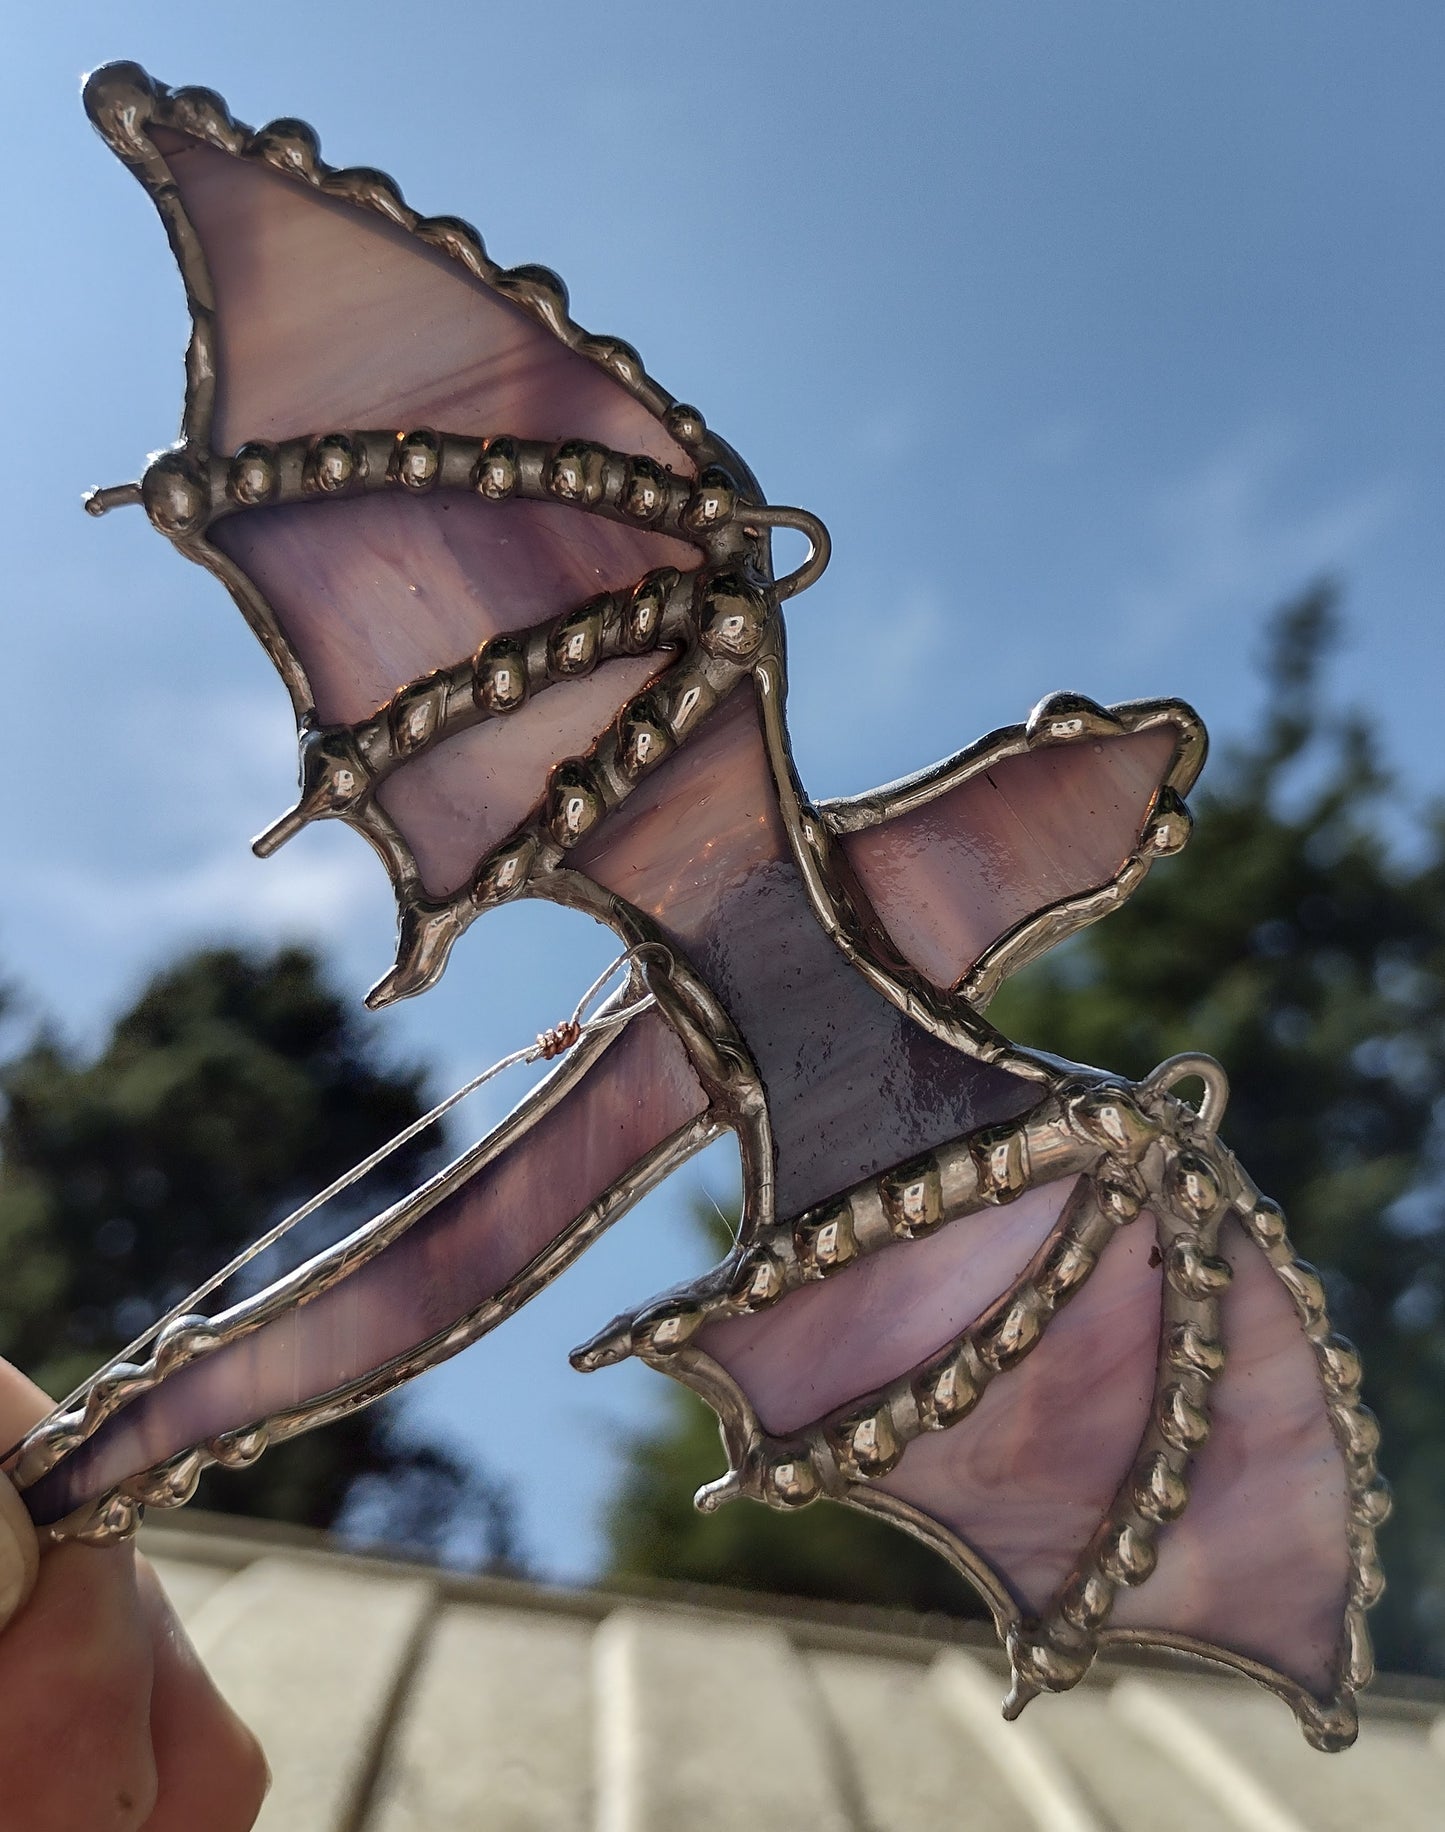 3D Dragon, stained glass, sun catcher, fire lizard, fantasy art.   Lavender marbled tiffany glass